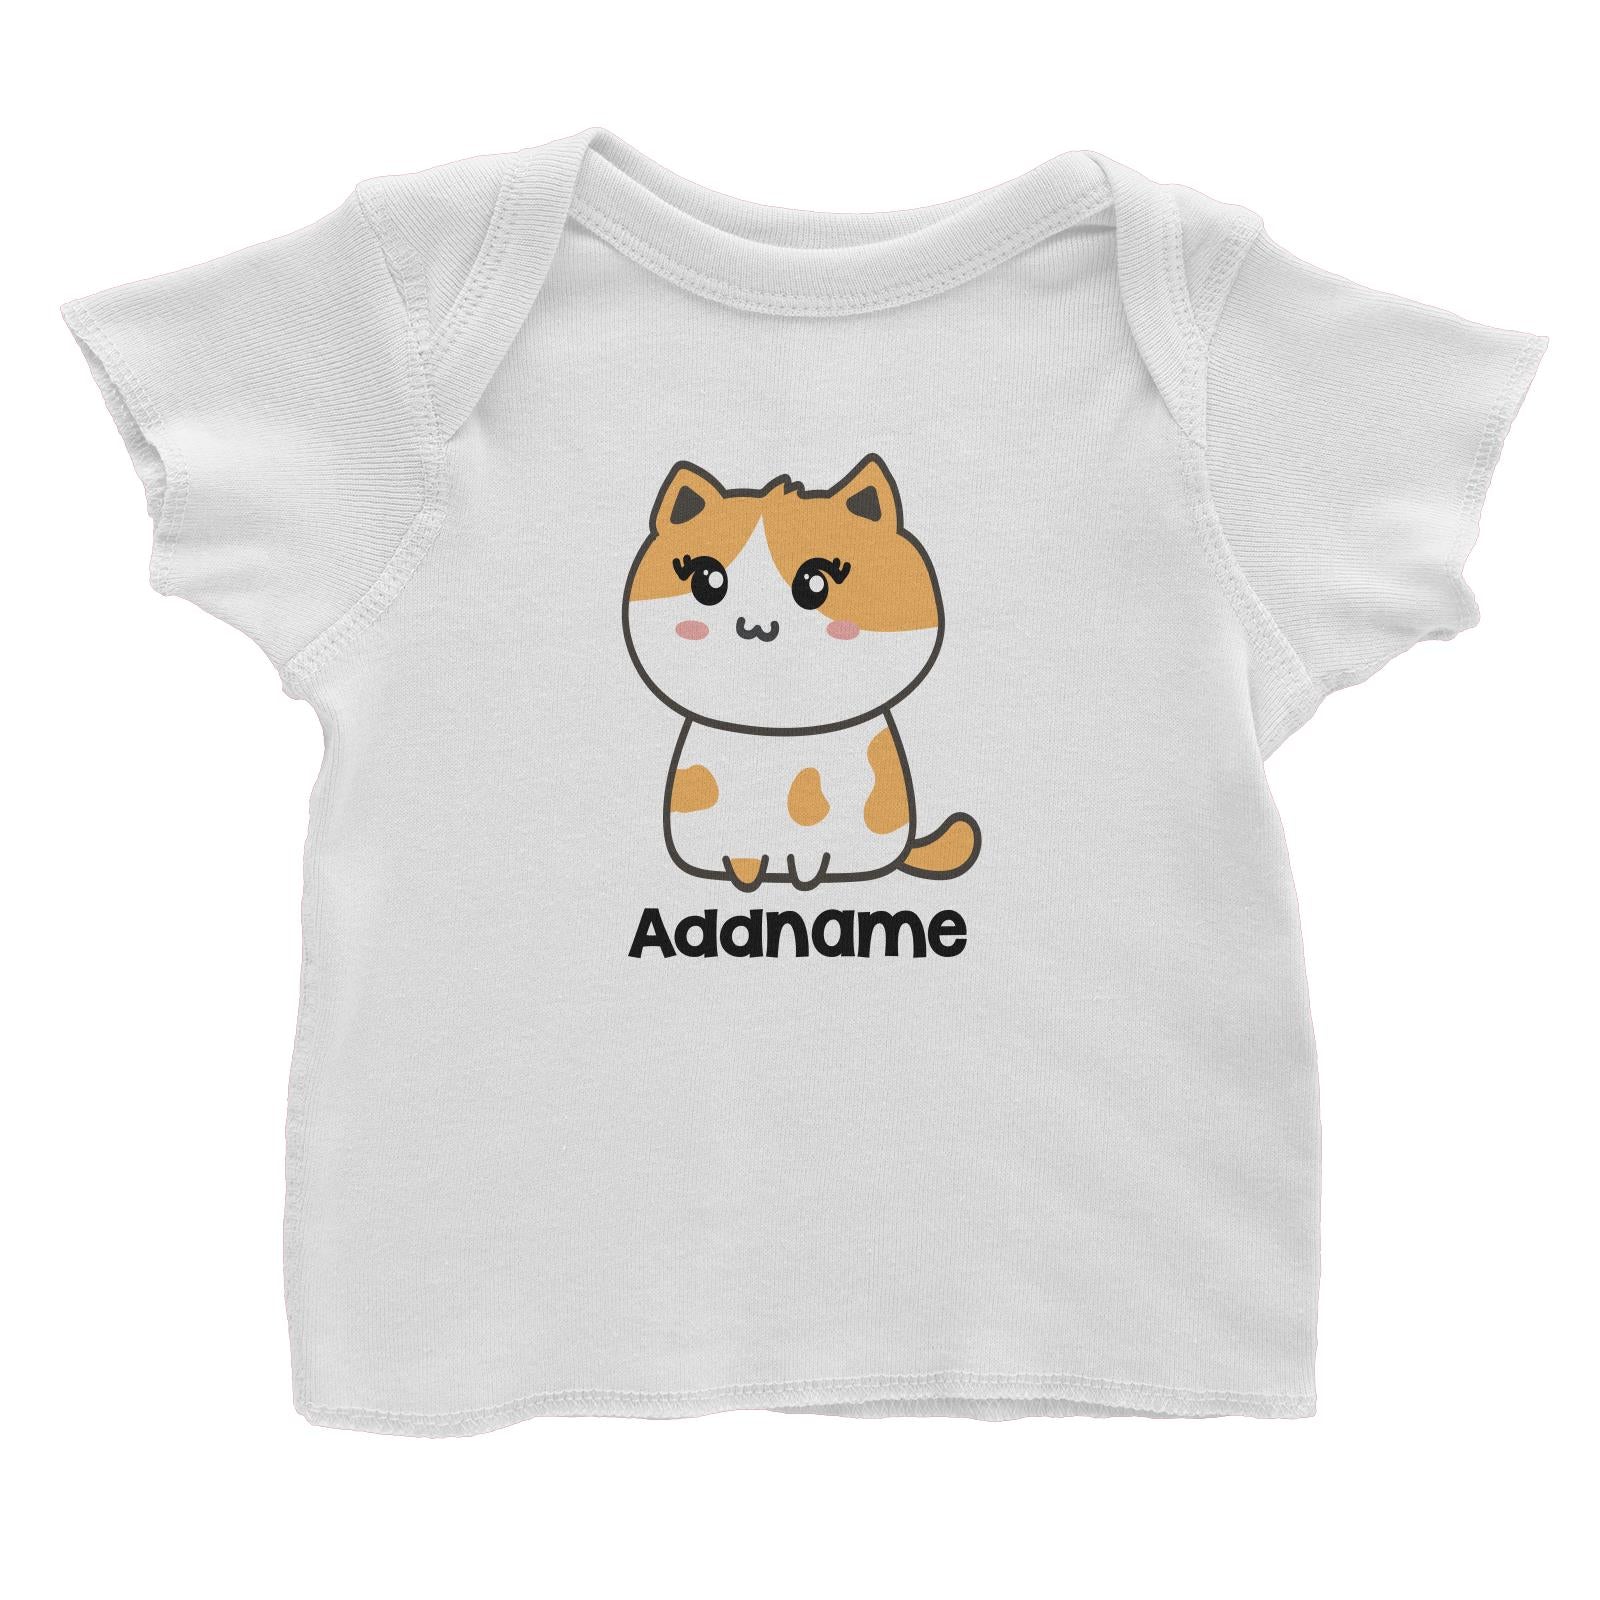 Drawn Adorable Cats White & Yellow Addname Baby T-Shirt